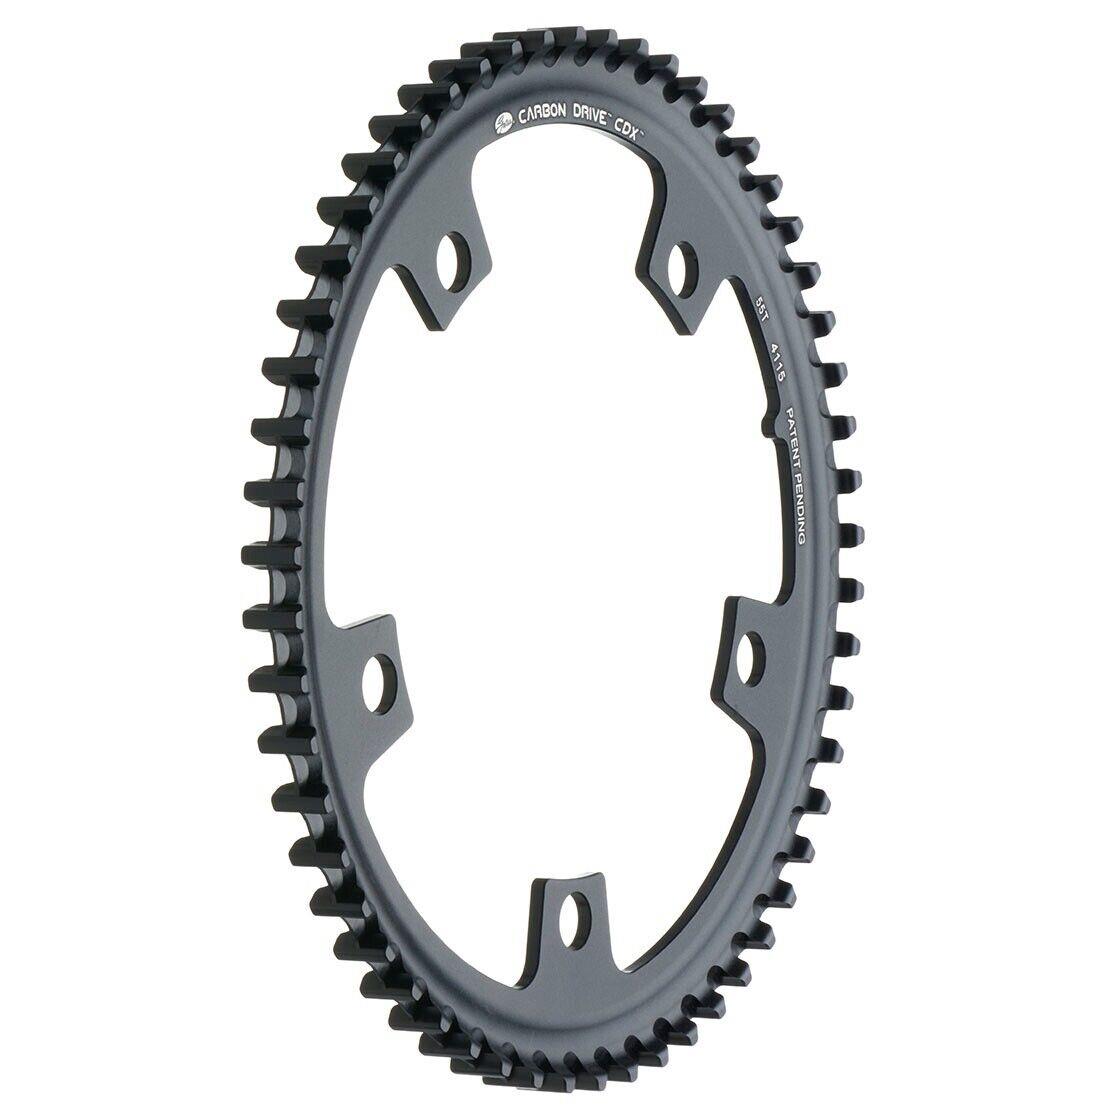 Front crown for CDX 48t 5-hole belt. Bolt circle 130mm